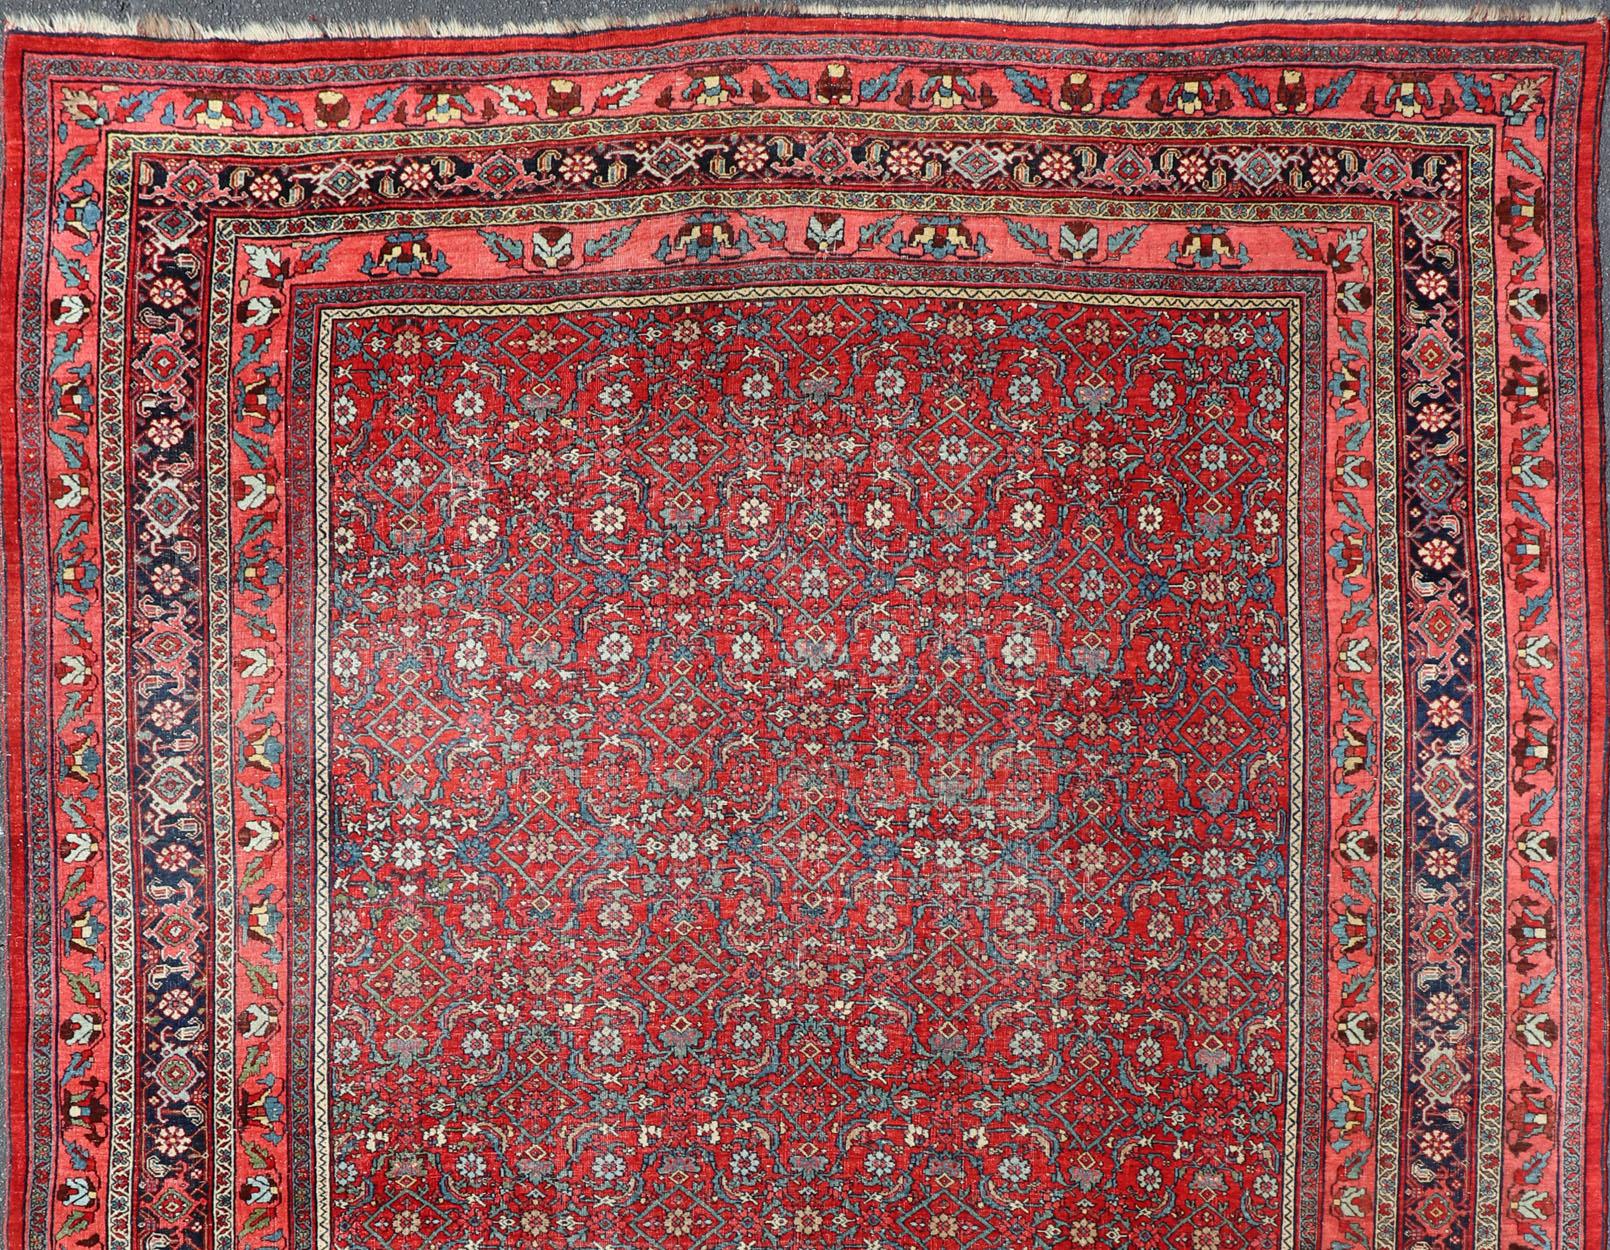 Antique Persian Bidjar rug with sub-geometric all-over design in red and blue. Keivan Woven Arts /  rug V21-0304, Keivan Woven Arts / country of origin / type: Iran / Bidjar, circa 1910
Measures:9'2 x 12'6.
This magnificent early 20th century